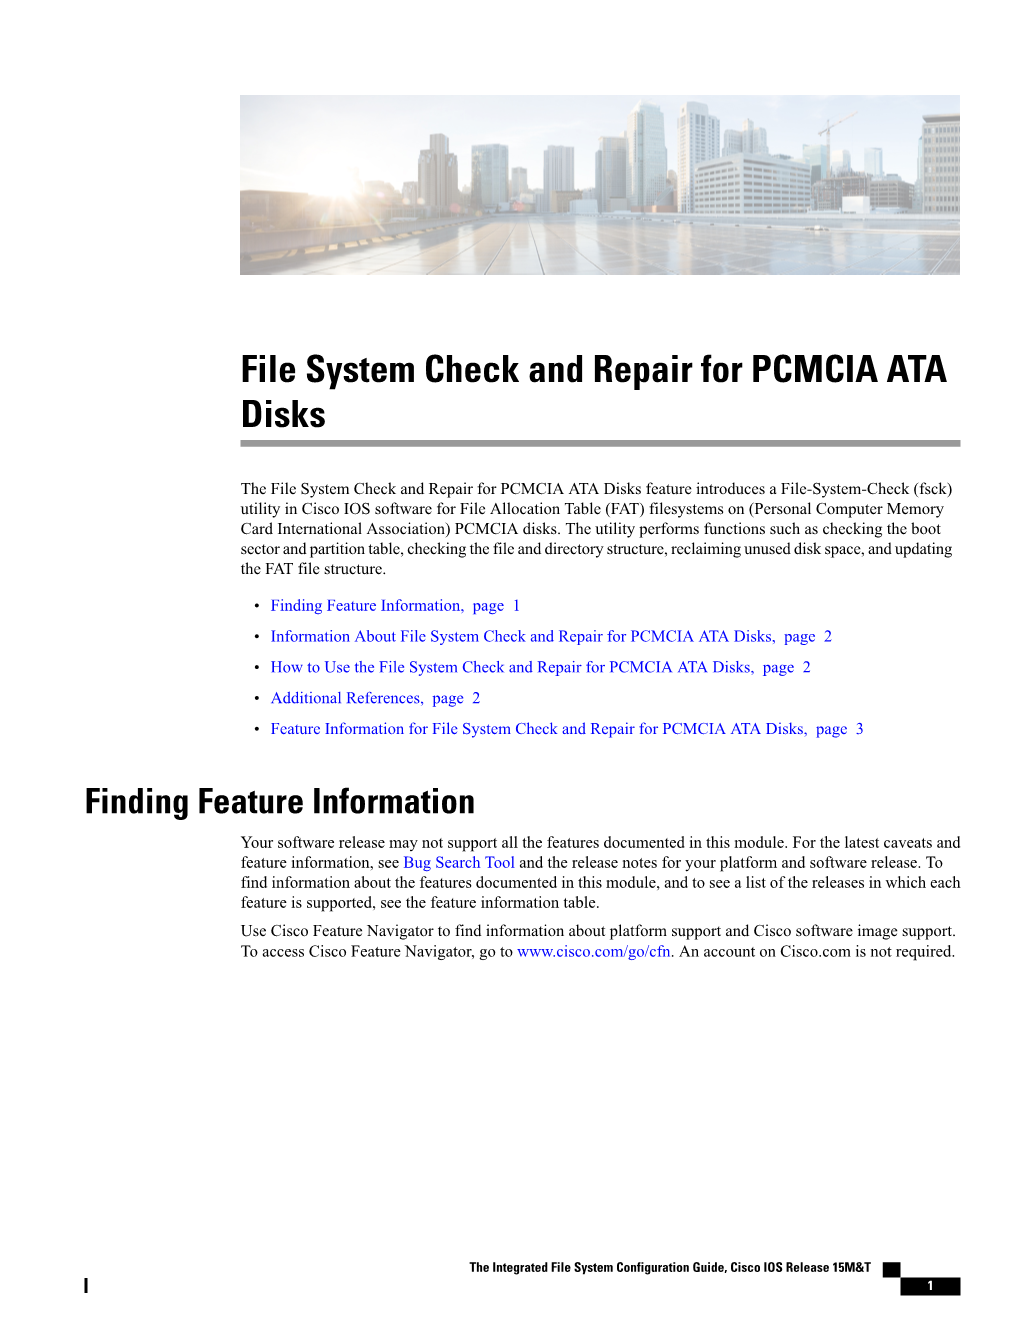 File System Check and Repair for PCMCIA ATA Disks